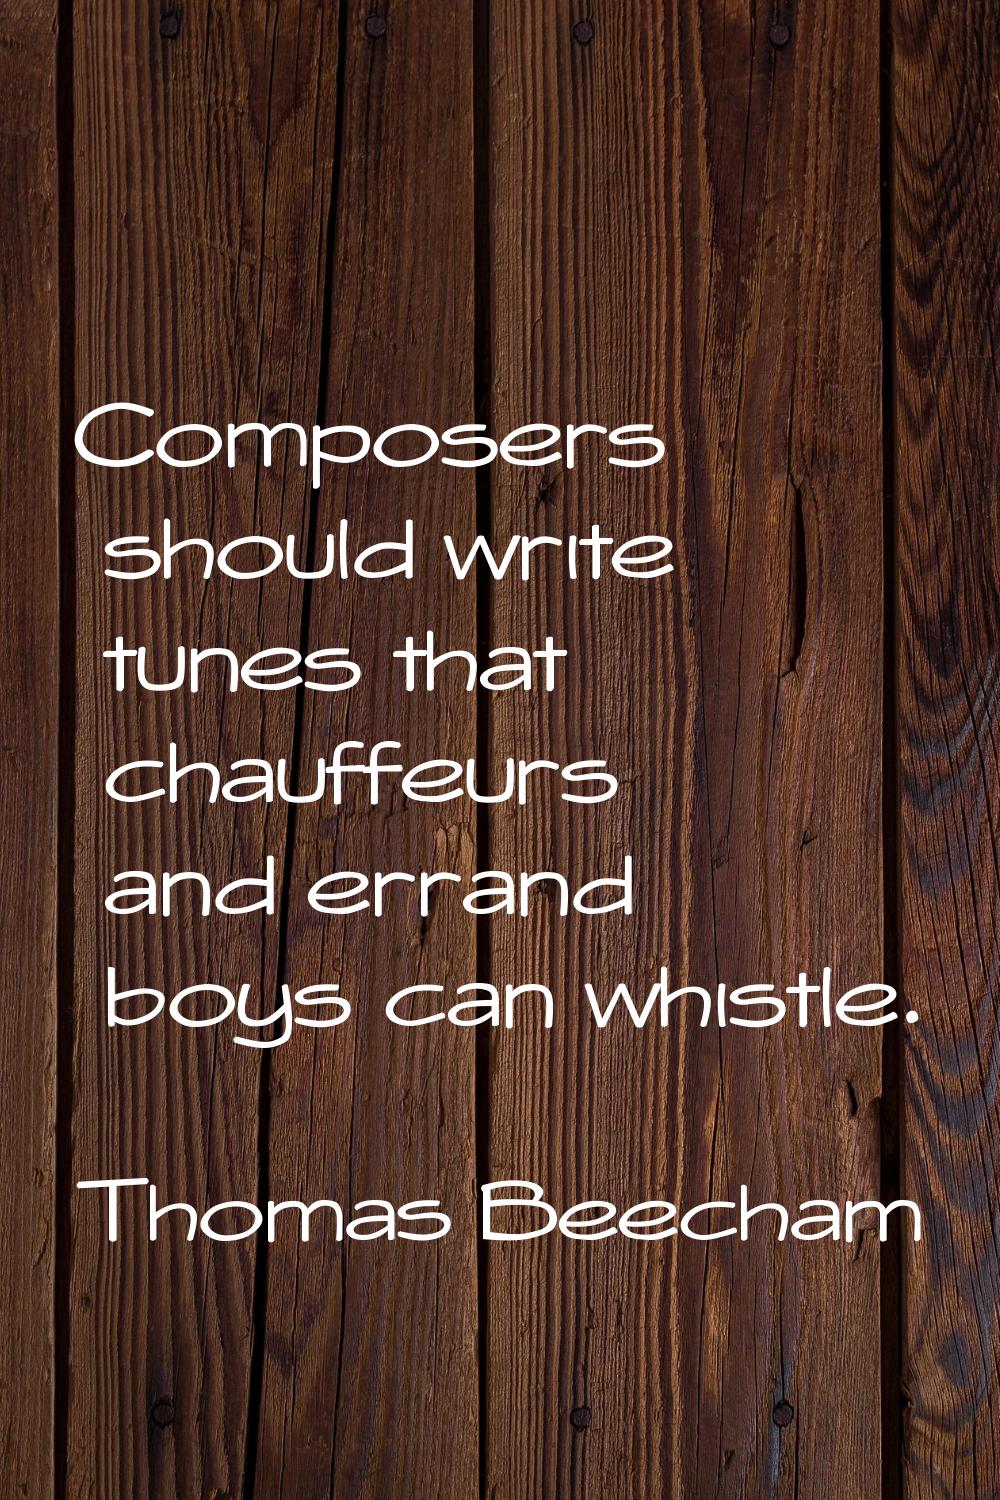 Composers should write tunes that chauffeurs and errand boys can whistle.